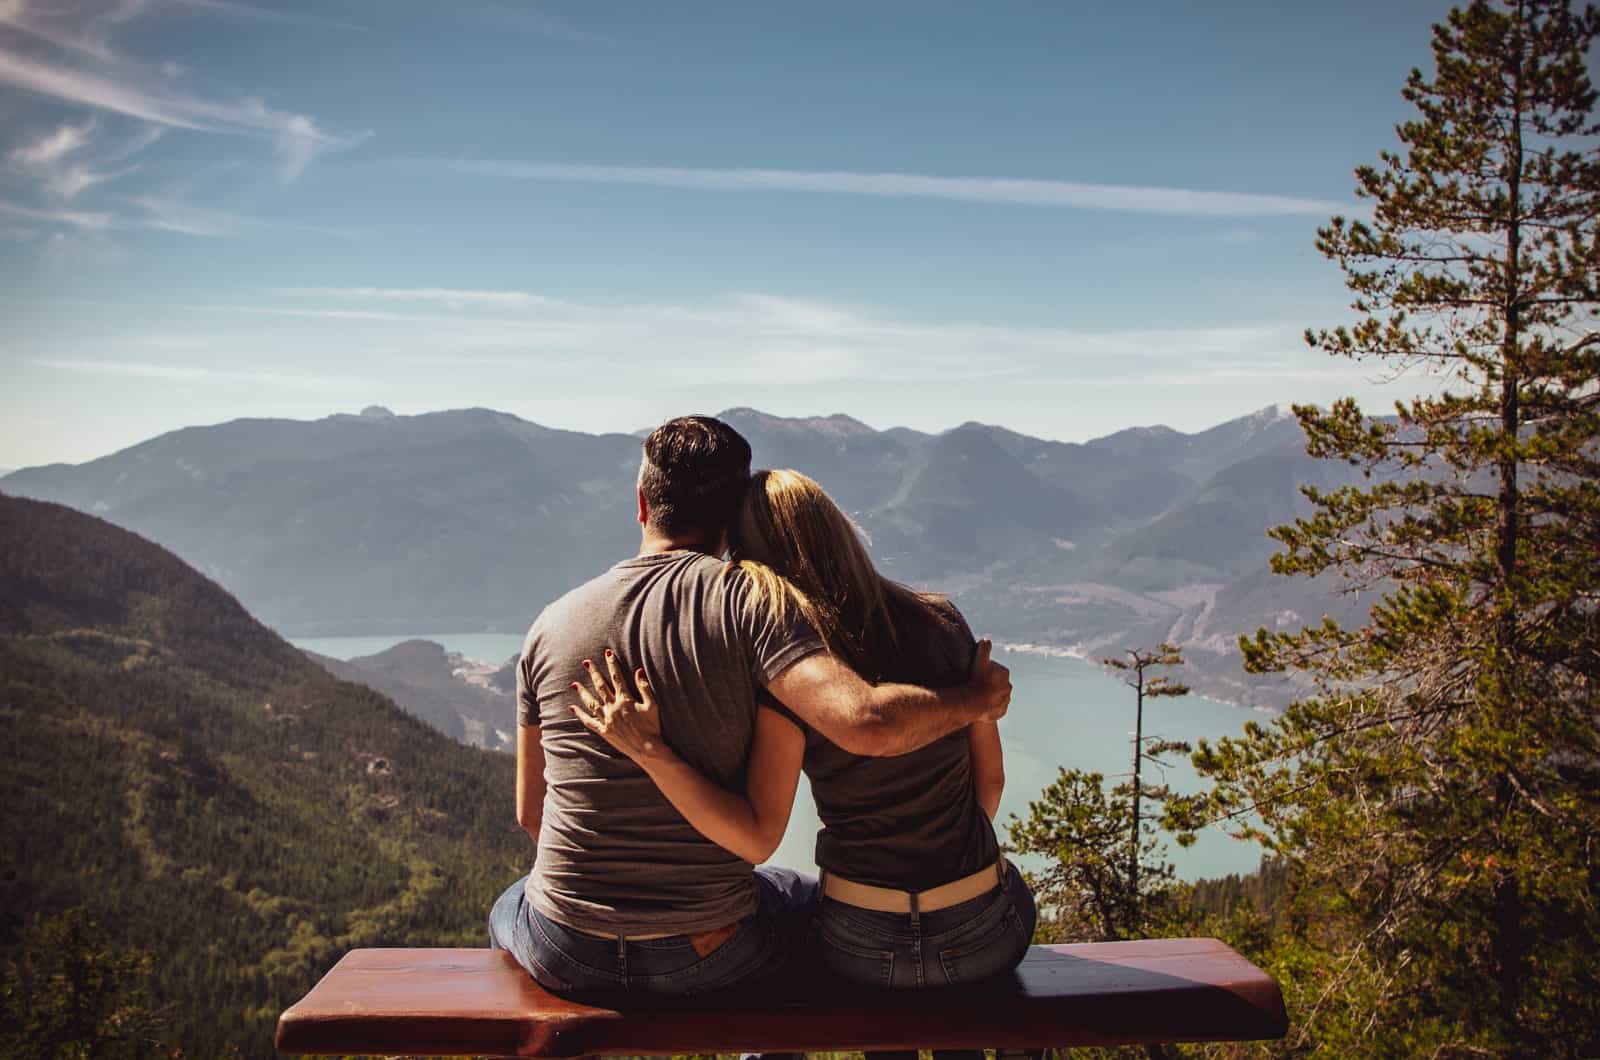 couple sitting together and enjoying the view in nature